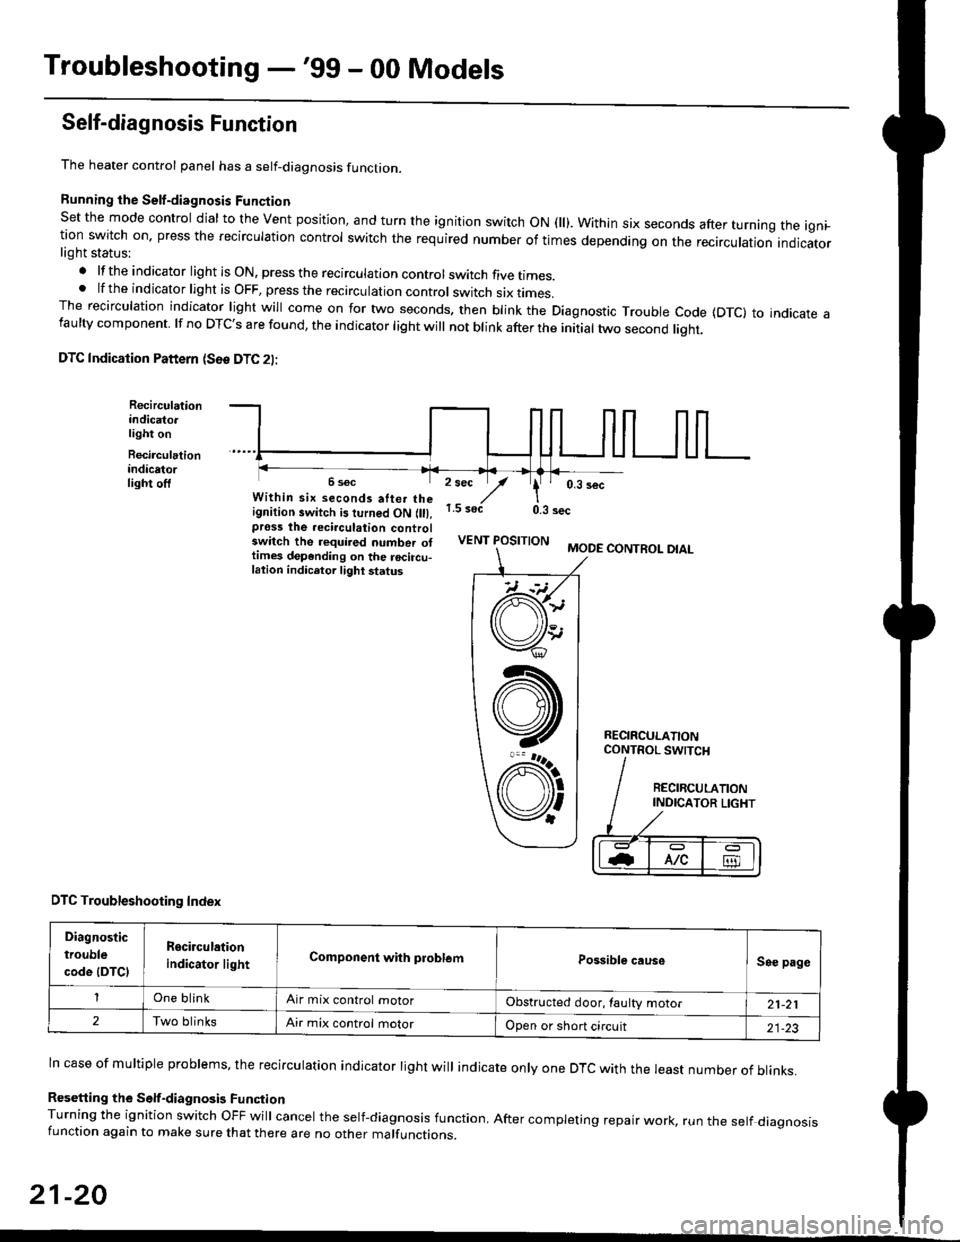 HONDA CIVIC 2000 6.G Workshop Manual Troubleshooting -99 - 00 Models
Self-diagnosis Function
The heater control panel has a self-diagnosis function.
Running the Self-diagnosis Funqtion
Set the mode control dial to the Vent position, and